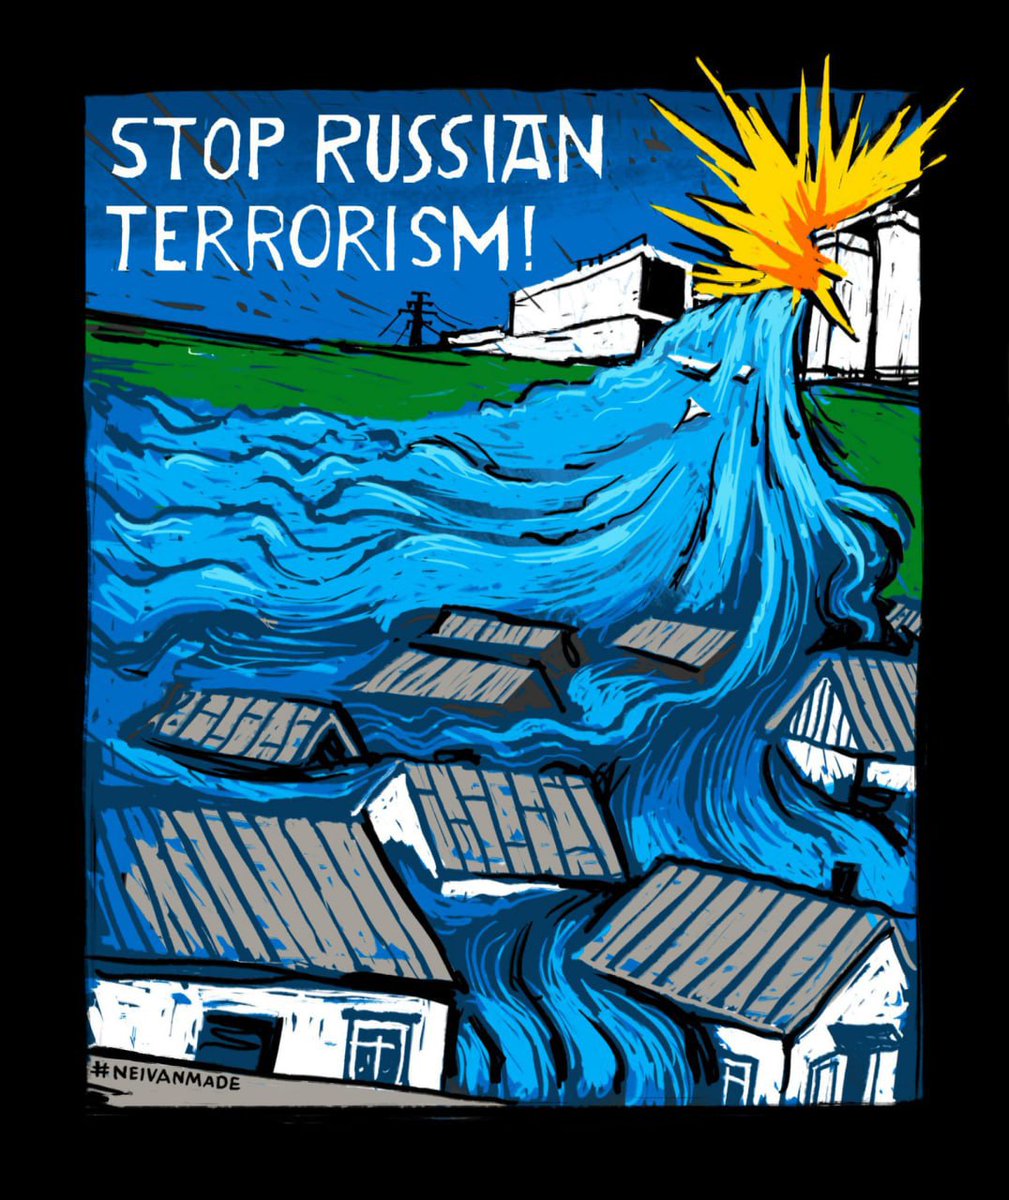 Blowing up Kakhovka HPP is yet another proof of Russian genocide policy against Ukrainians.

Russia has no place in UN Security Council or the UN in general, or any other international organizations. 

Terror against Ukrainian energy objects and destroying Ukrainian fertile…